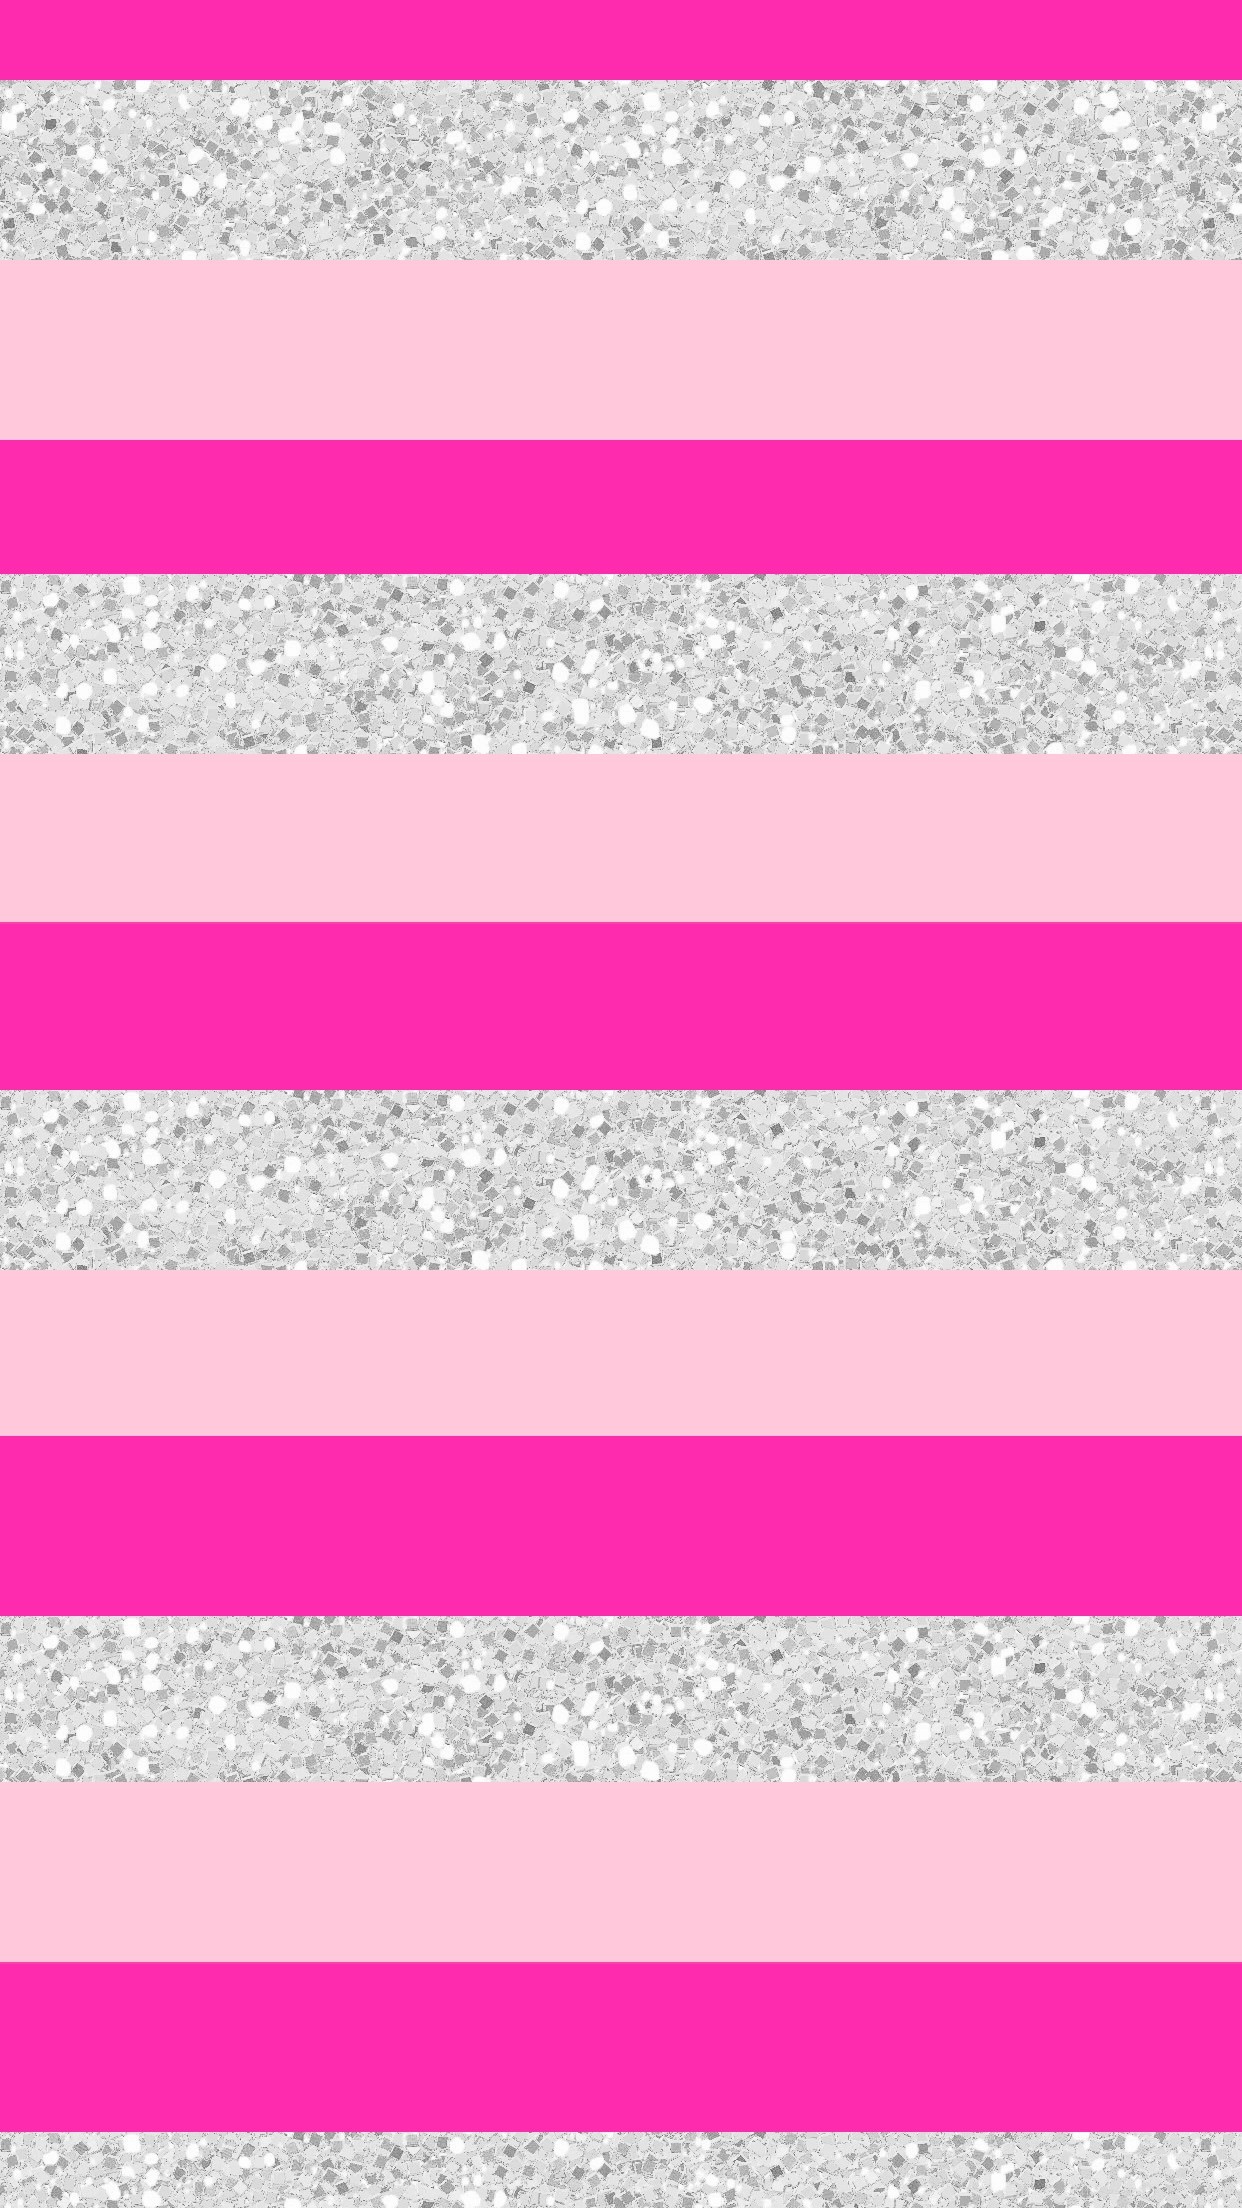 1242x2208 Wallpaper, background, iPhone, Android, HD, pink, silver, glitter,